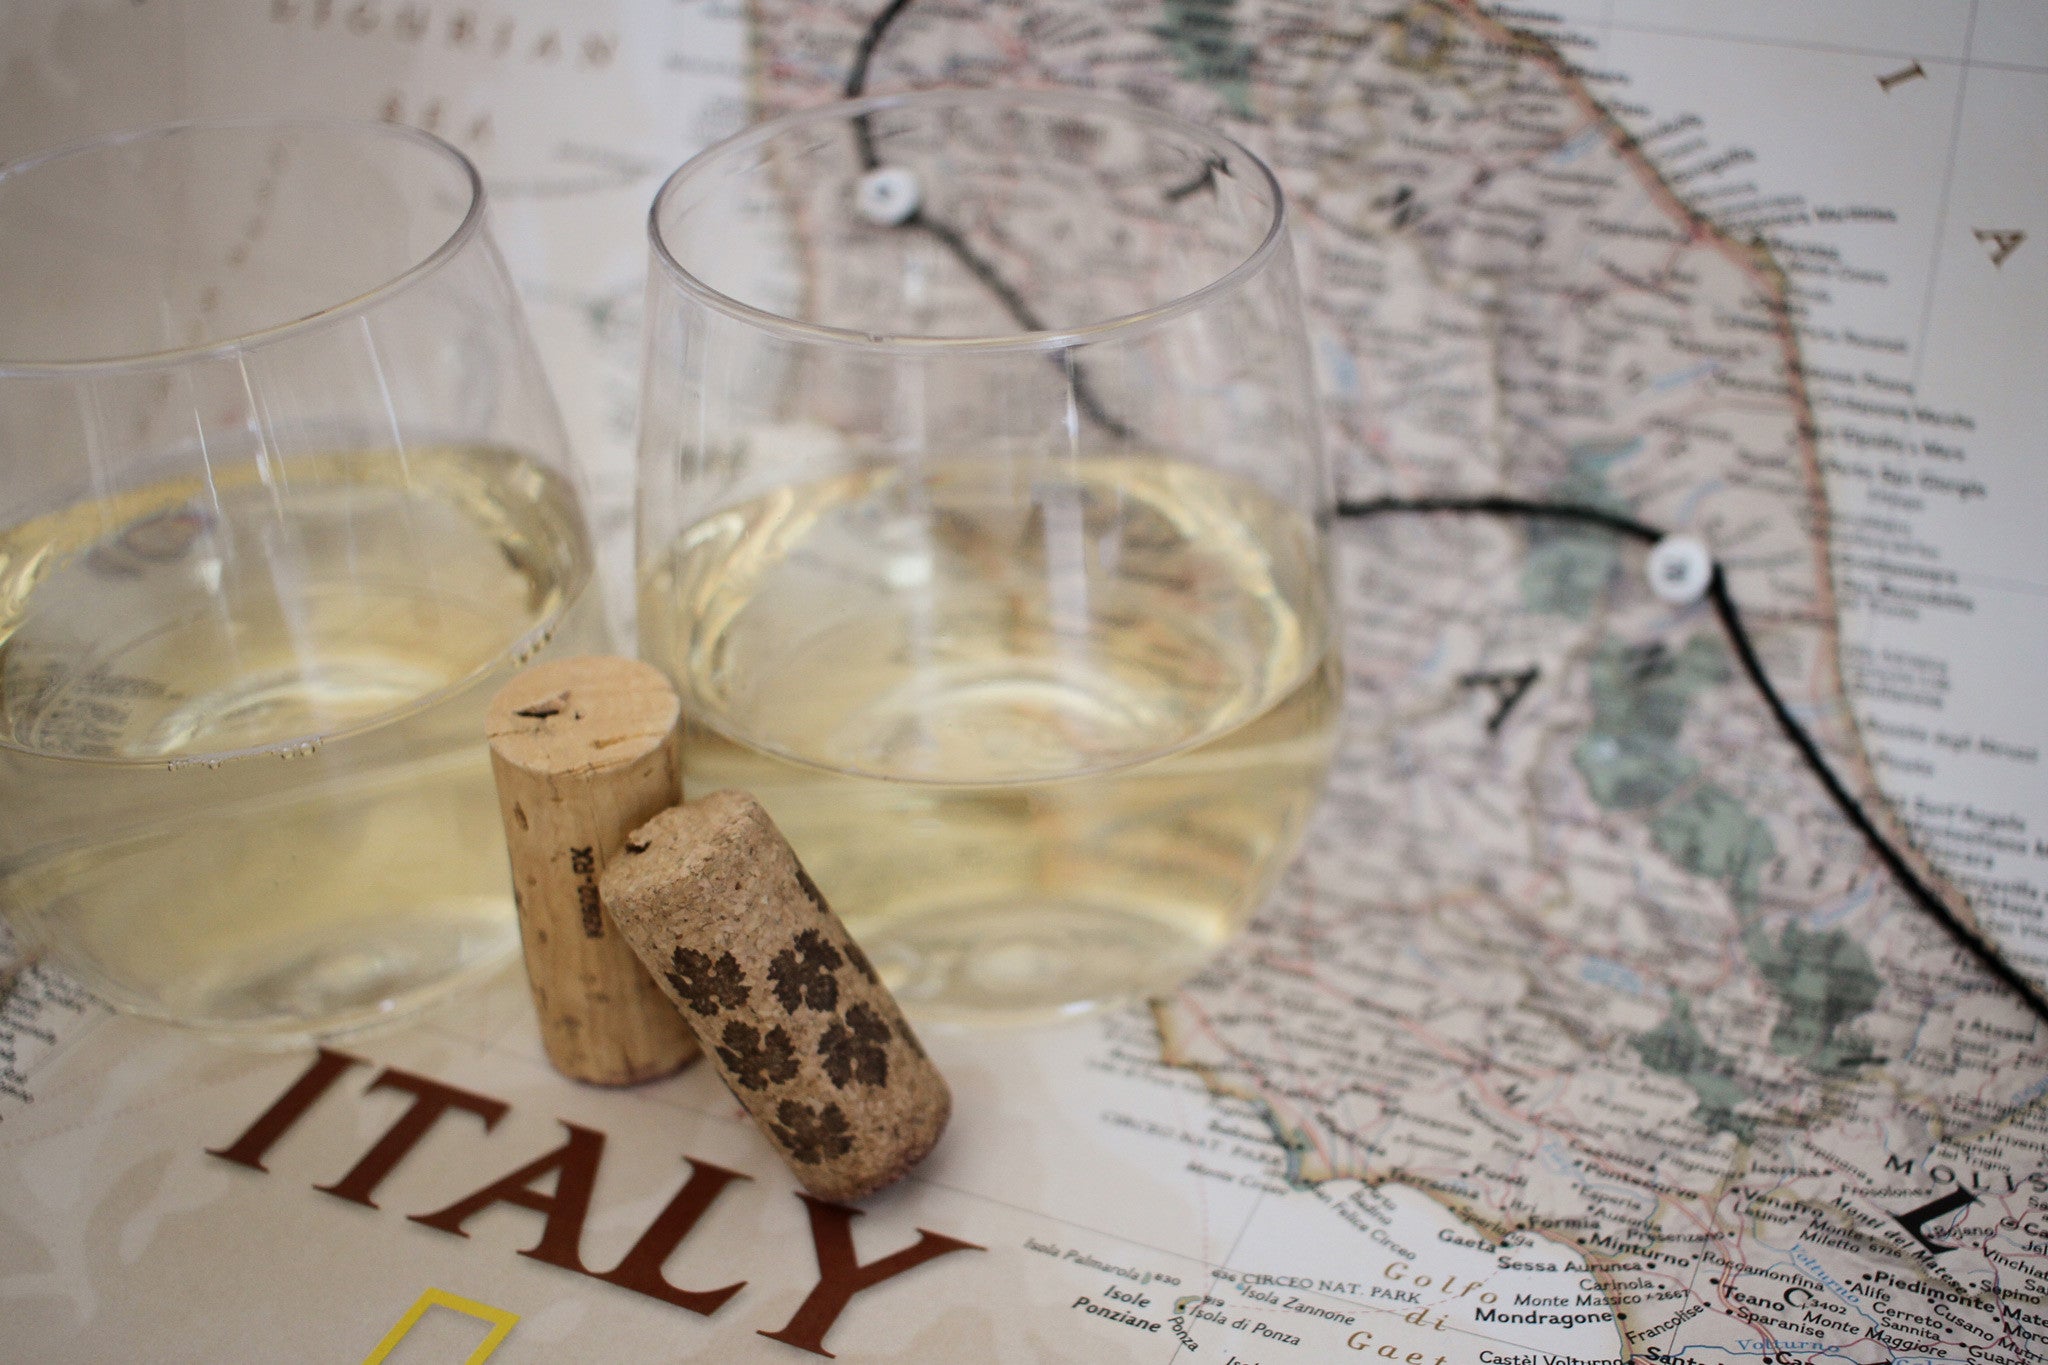 Marche wines, touring Italy by the wine glass, Verdicchio pairing 